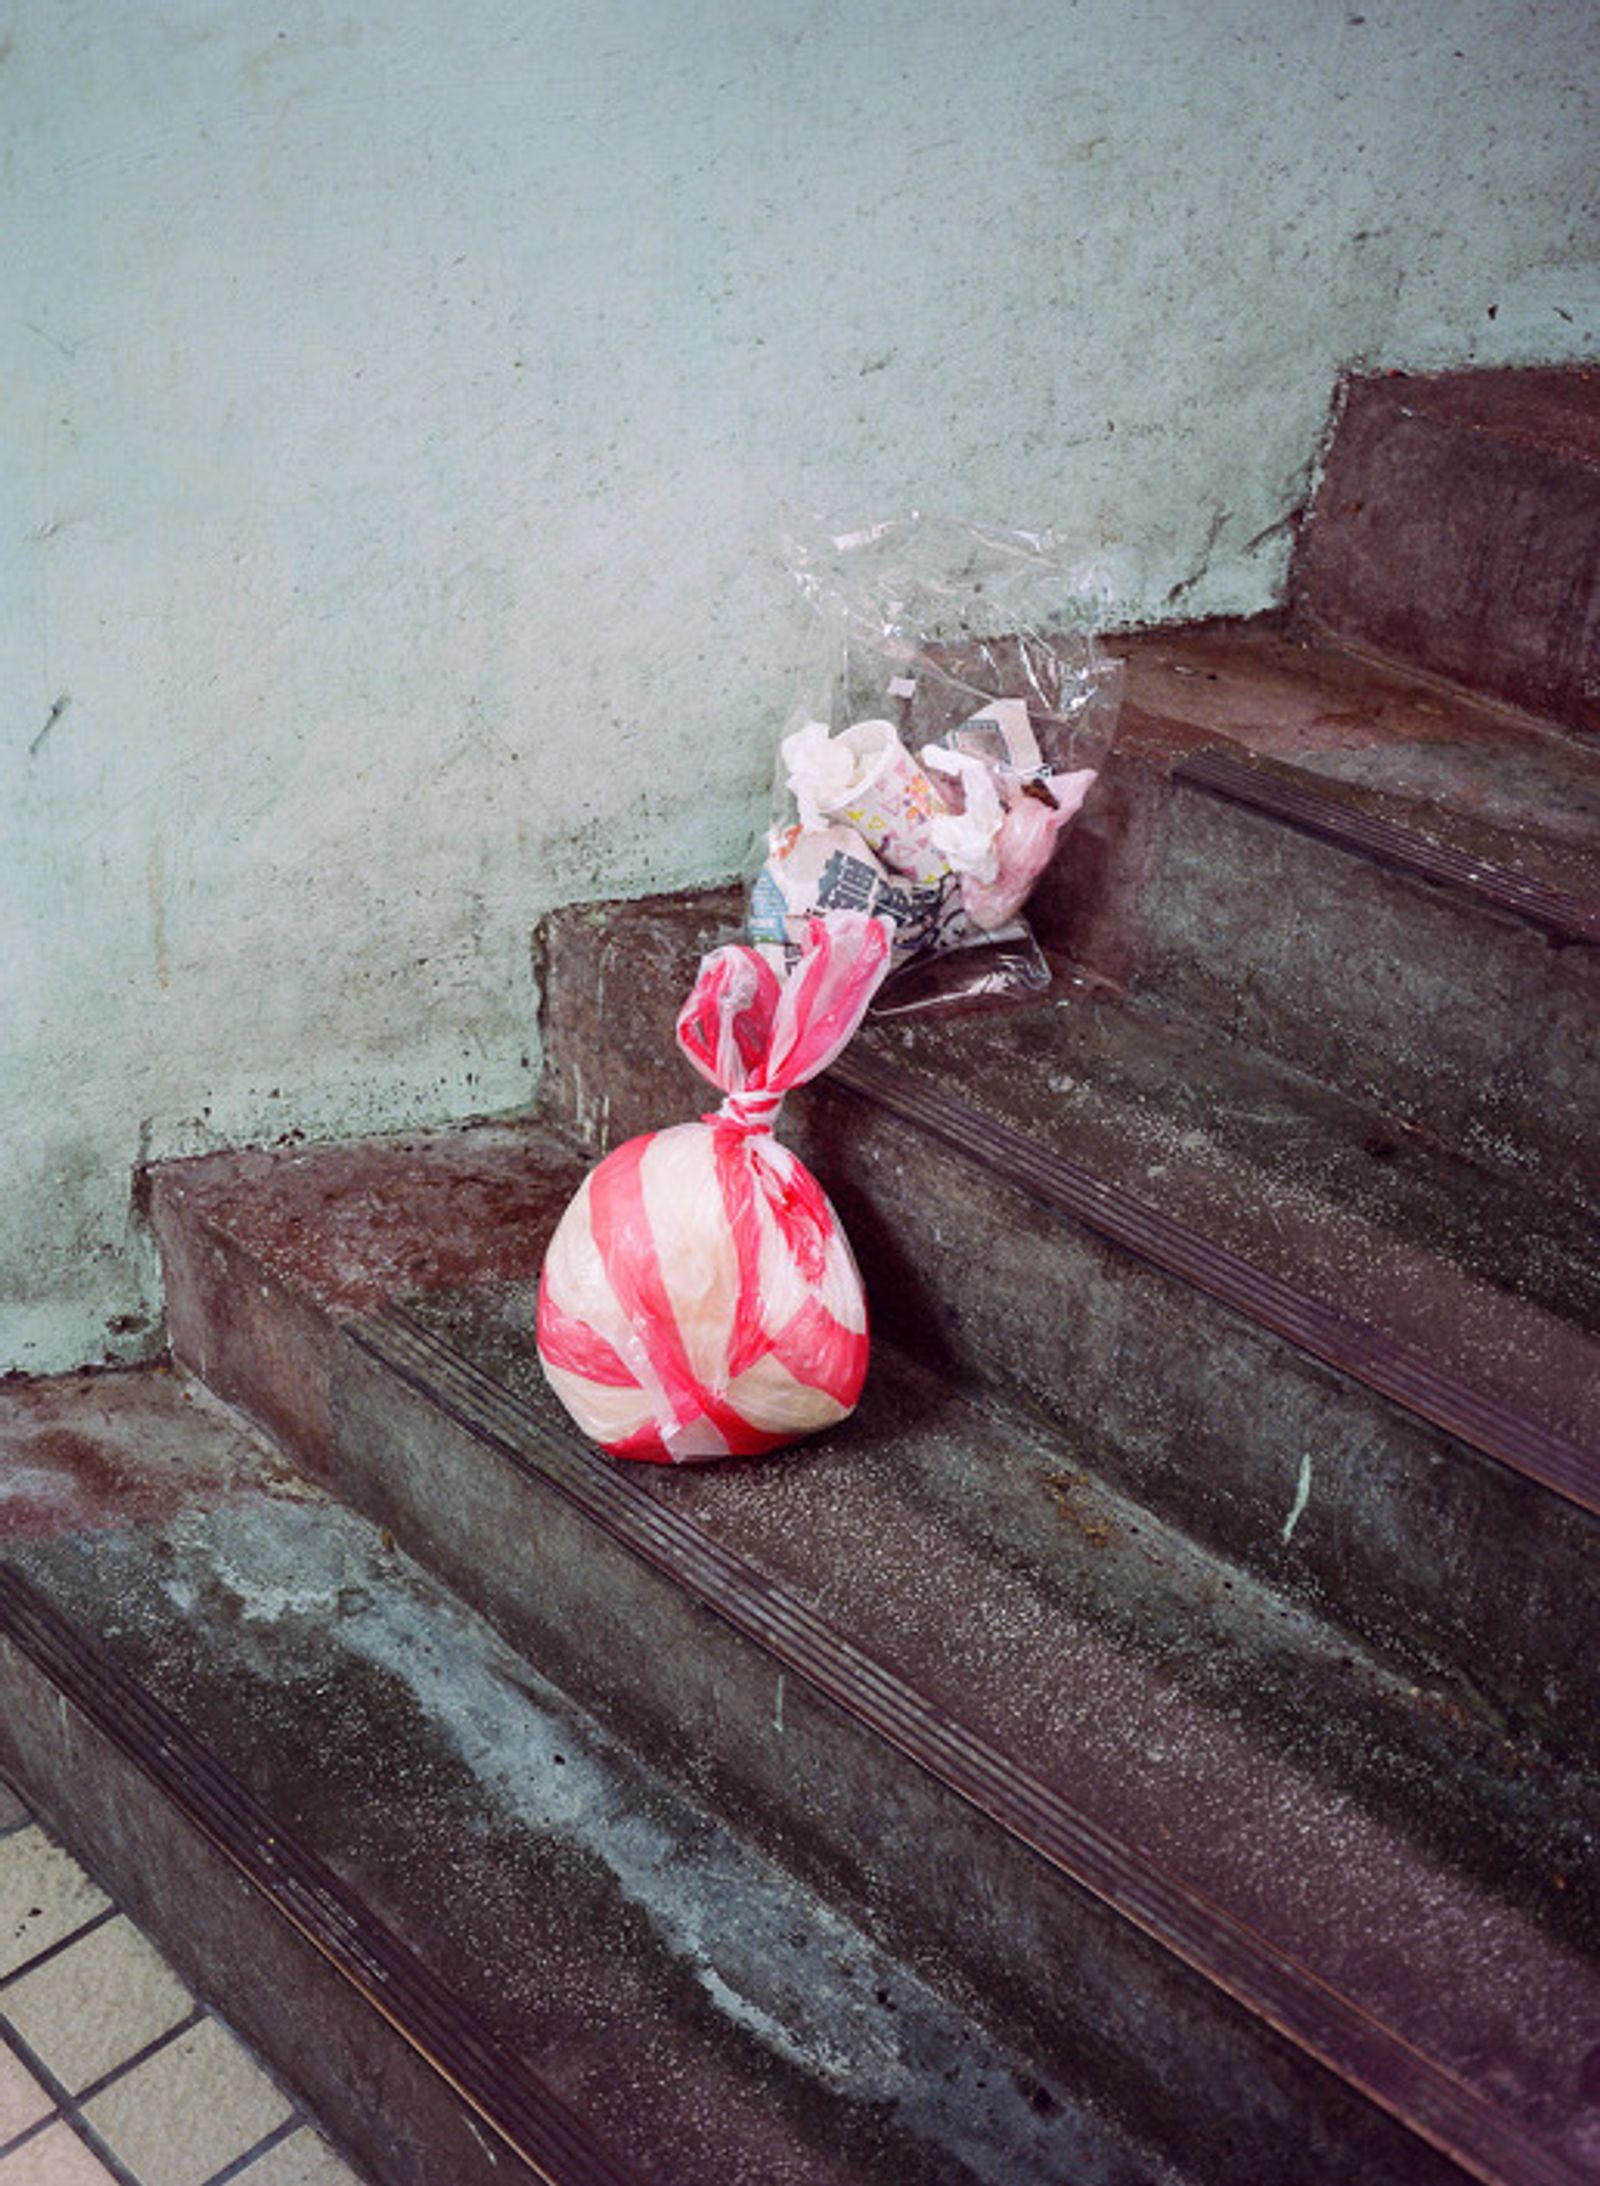 © I-hsuen Chen - Image from the Still Life Taiwan photography project